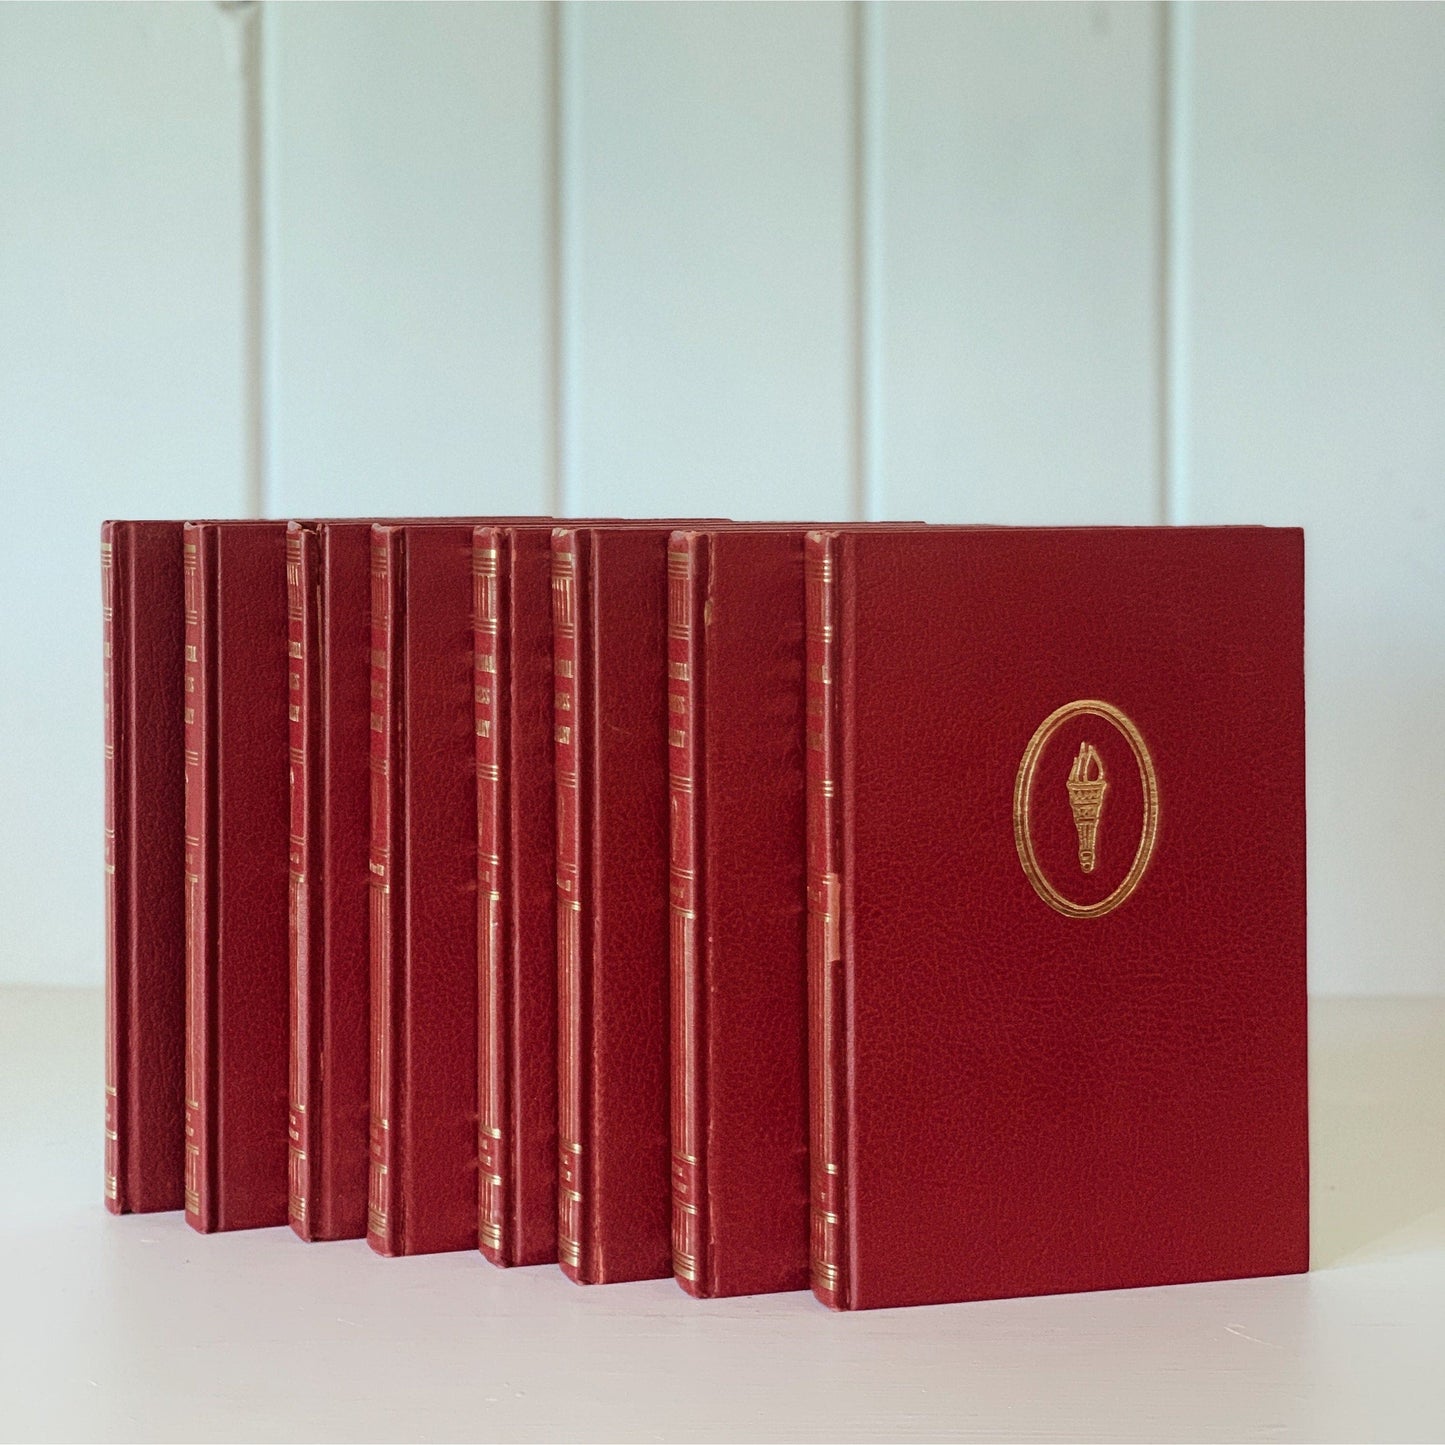 Personal Success Library Vintage Red and Gold Book Set, 1965